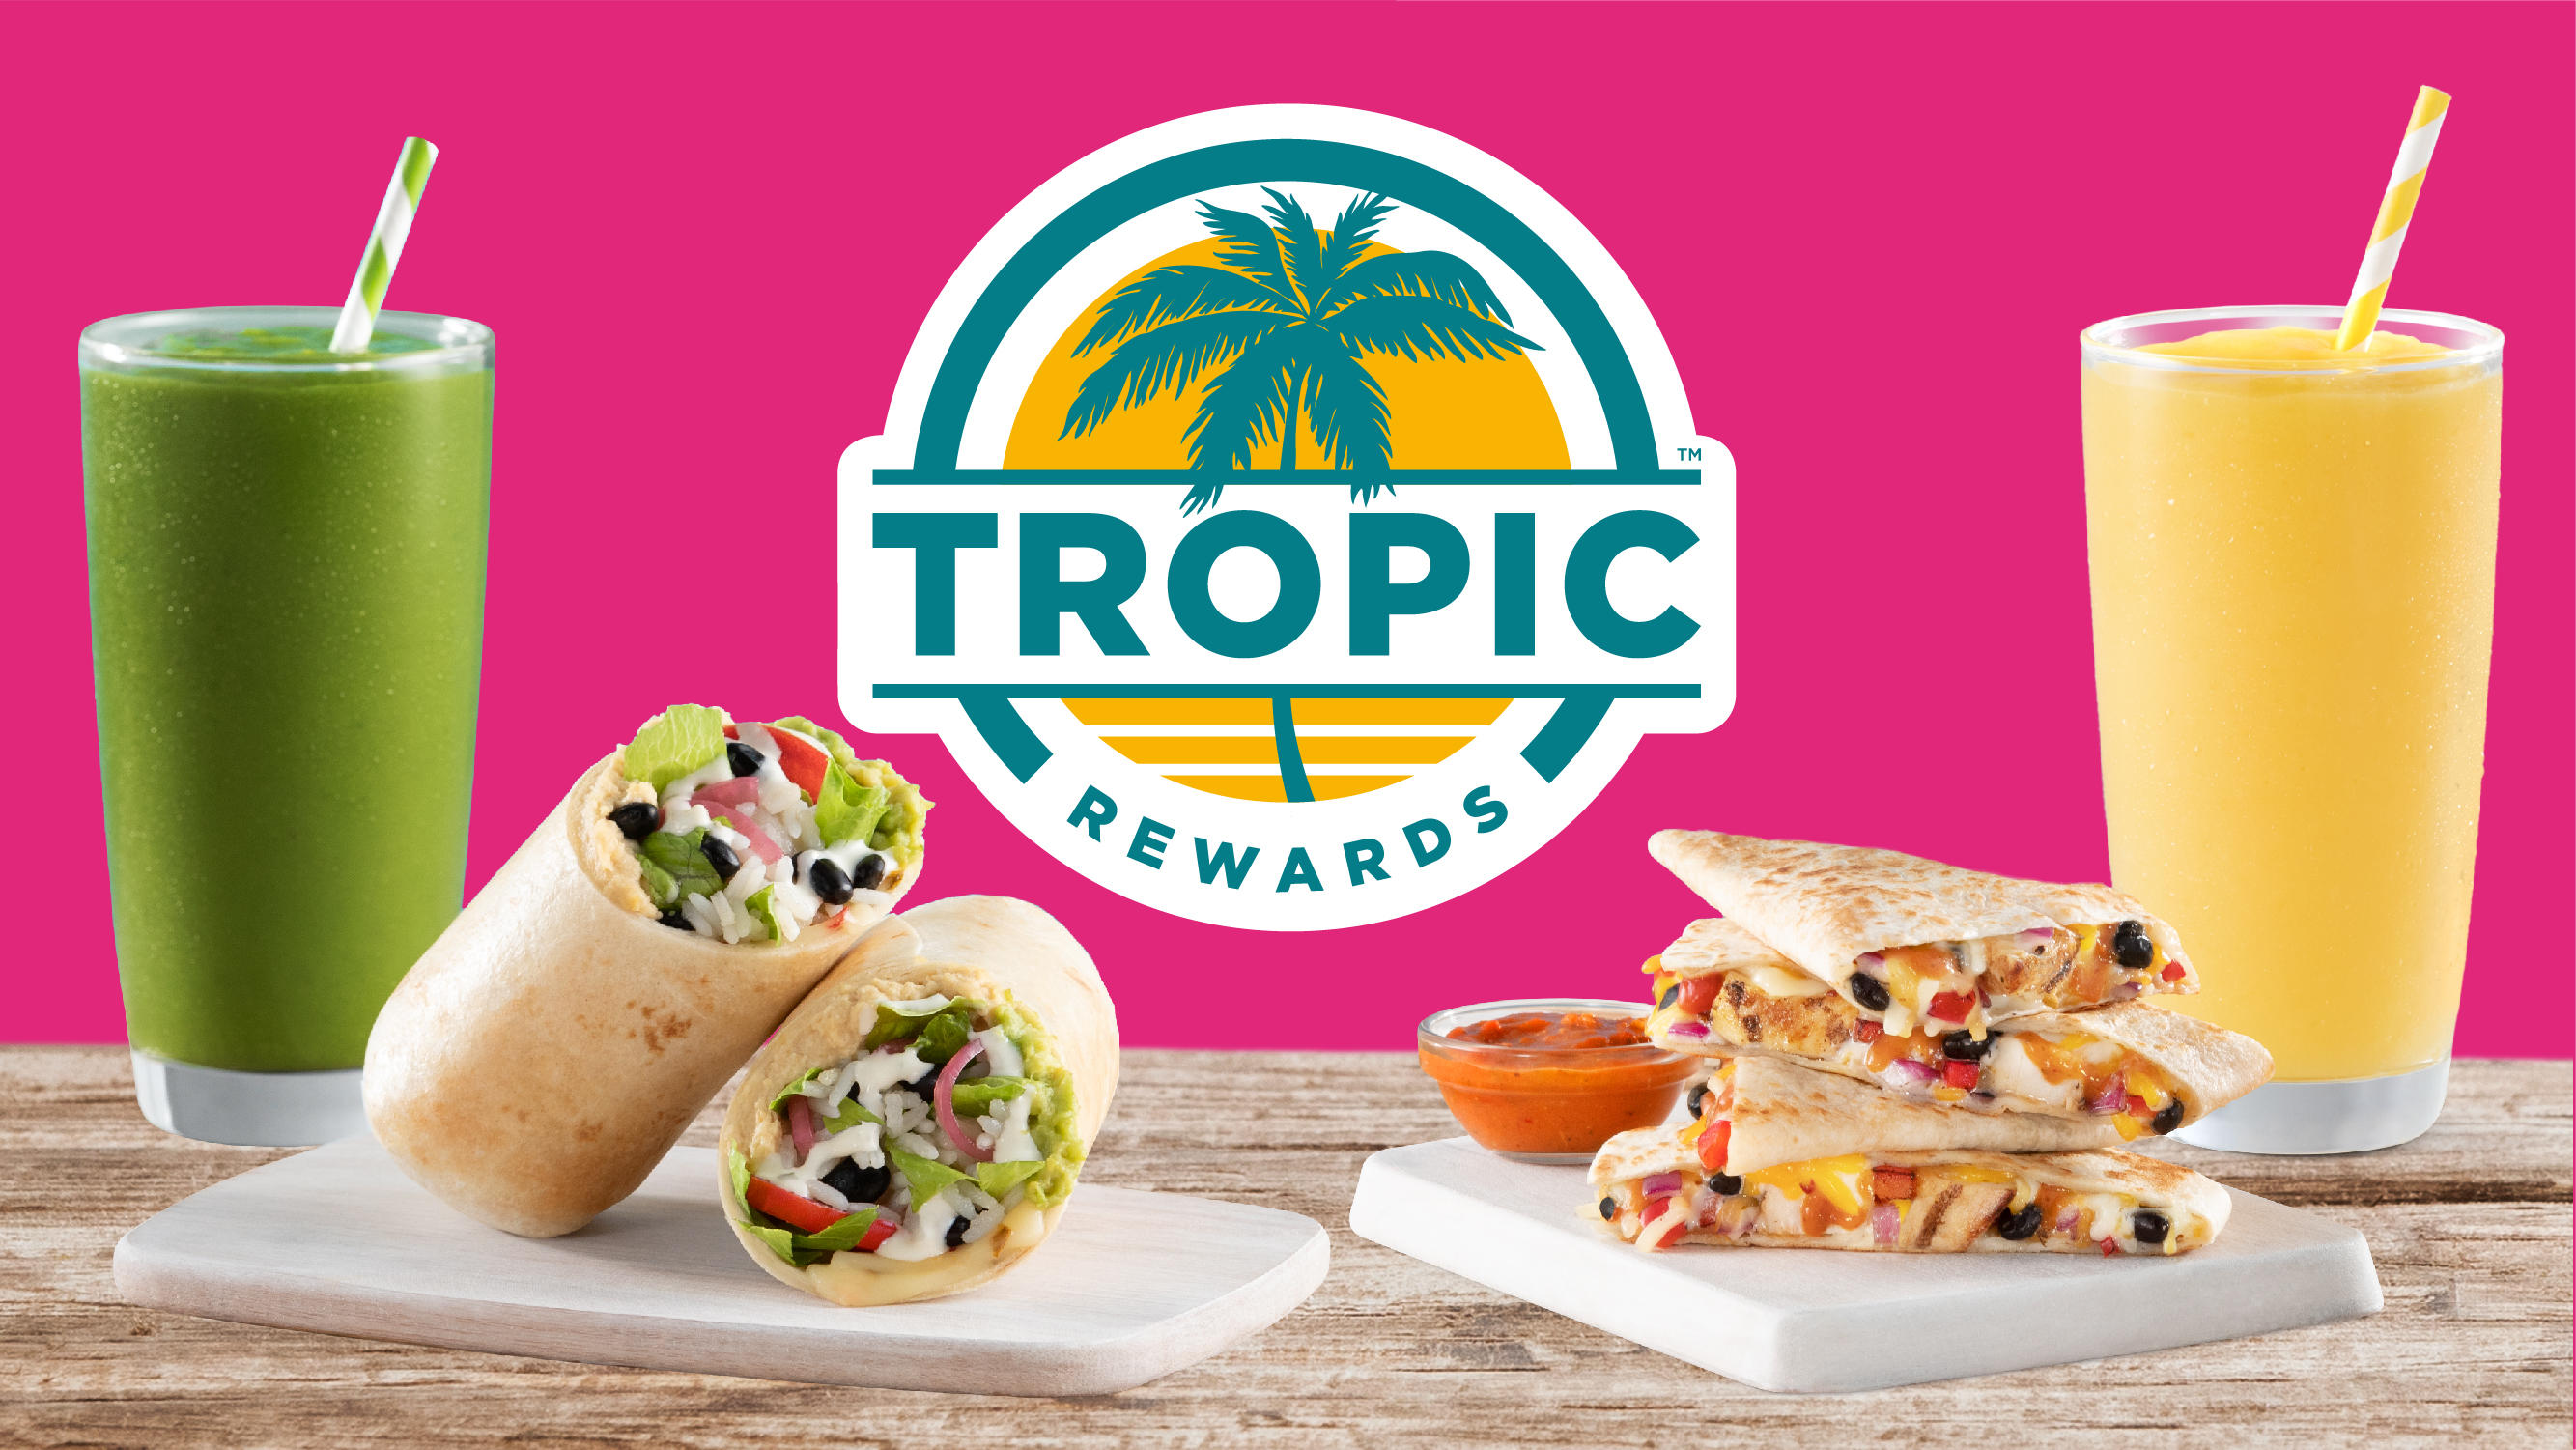 TROPIC REWARDS® IS WHERE IT’S AT